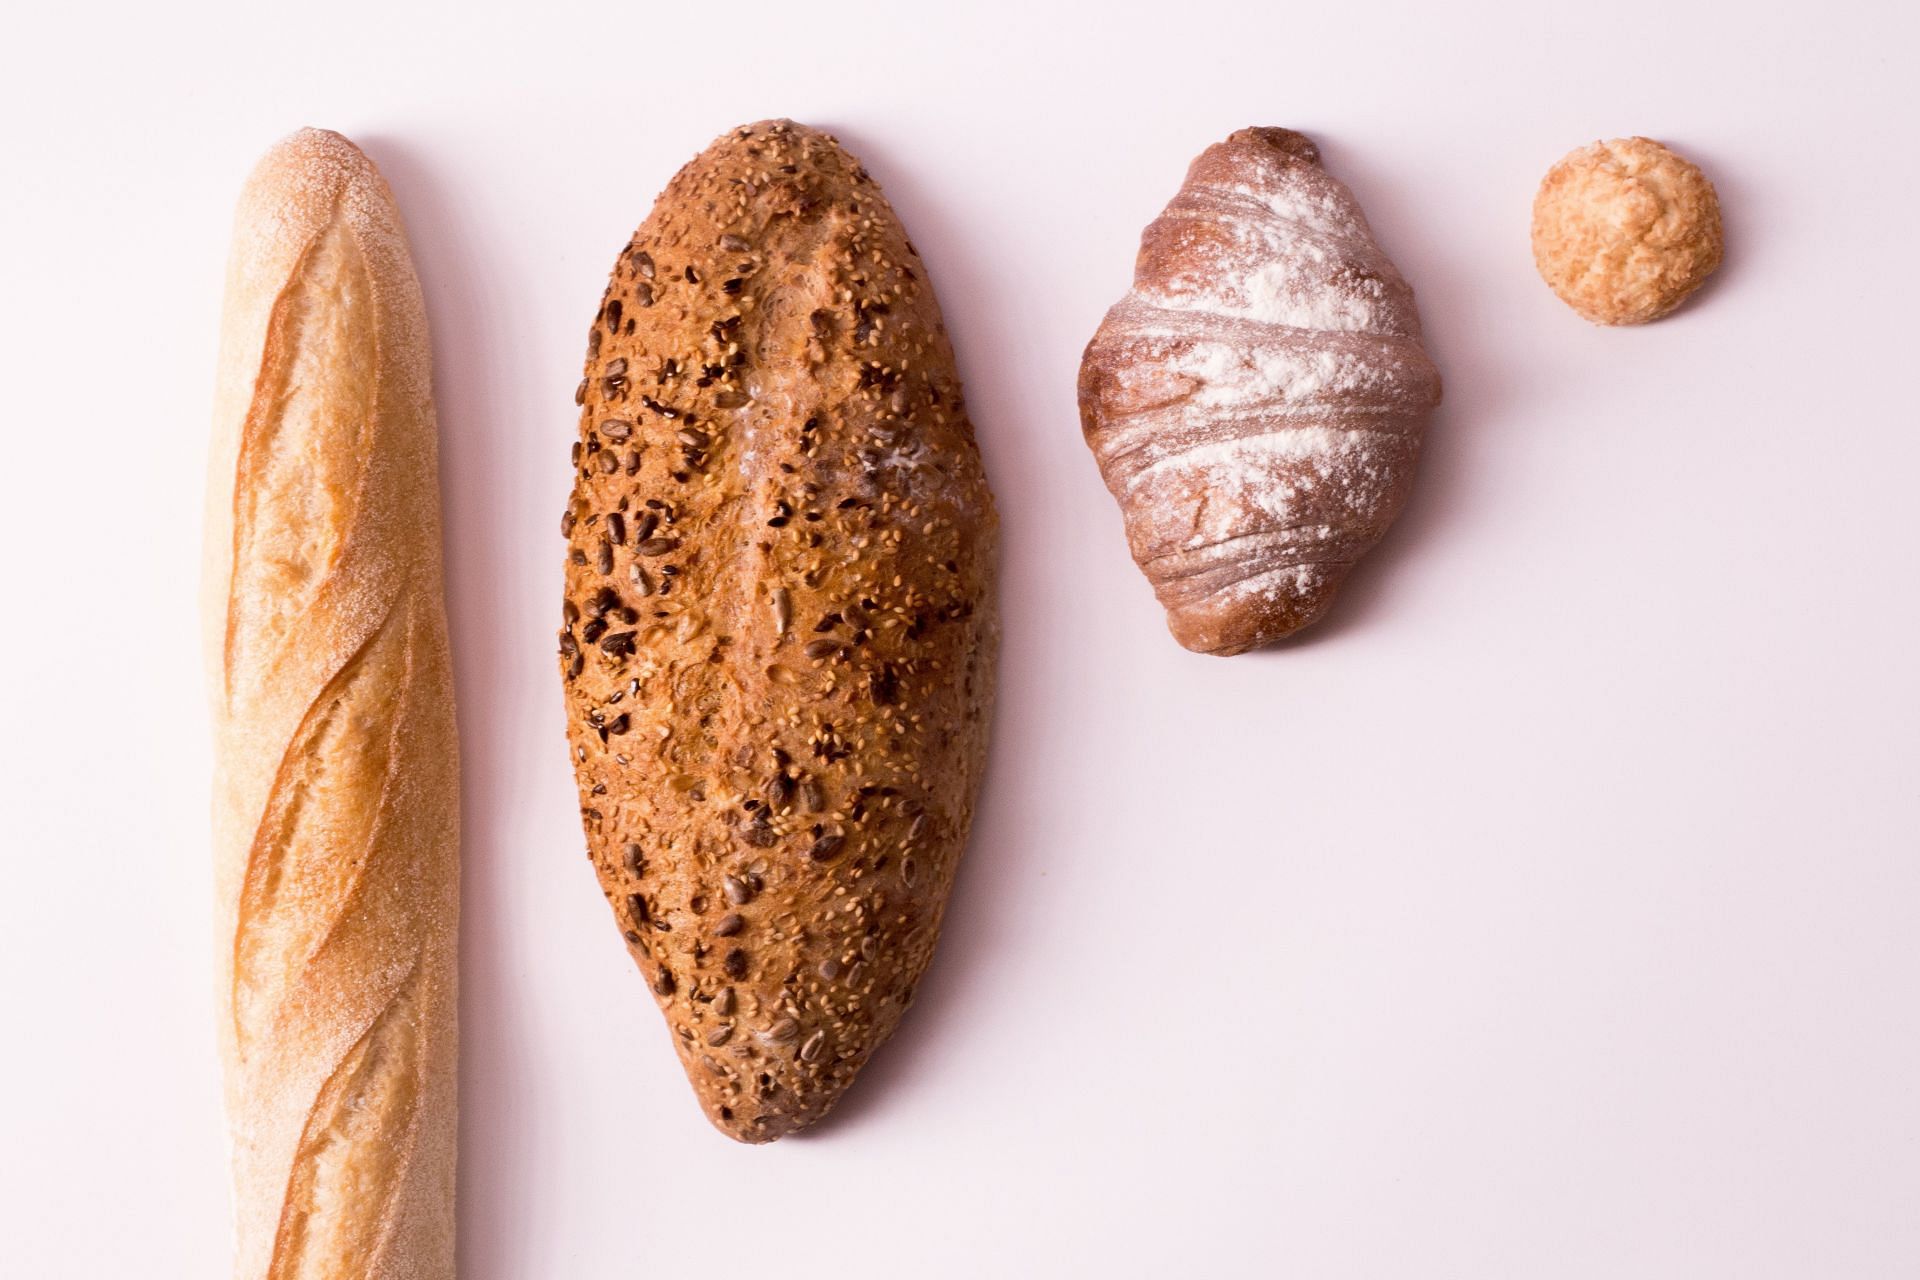 Bread has been the staple food for almost all civilisations (Image via Pexels @Mariana Kurnyk)